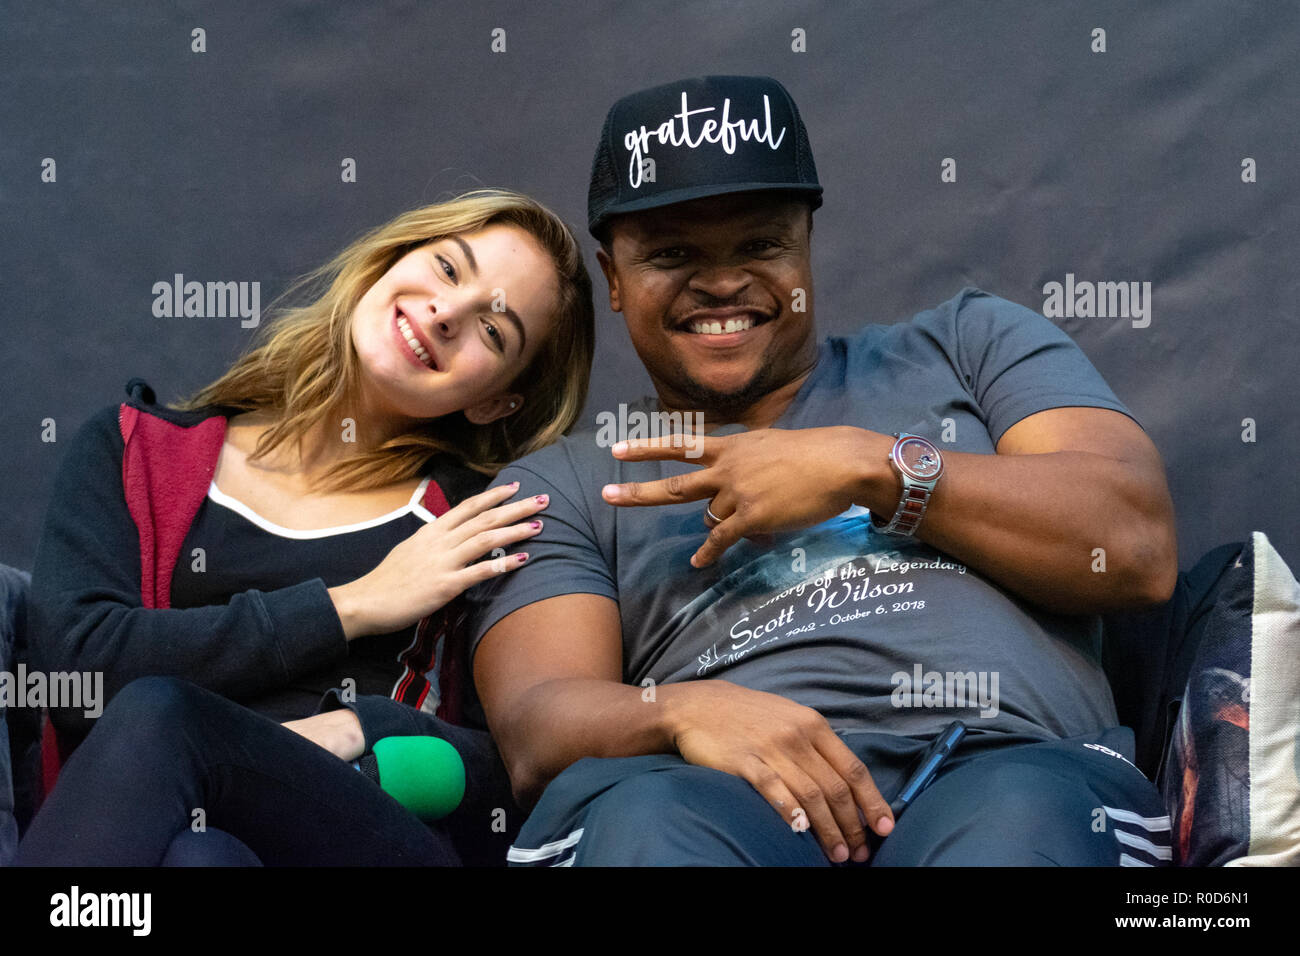 Dortmund, Germany. 3rd November, 2018. Brighton Sharbino and IronE Singleton at Weekend of Hell 2018, a two day (November 3-4 2018) horror-themed fan convention. Credit: Markus Wissmann/Alamy Live News Stock Photo